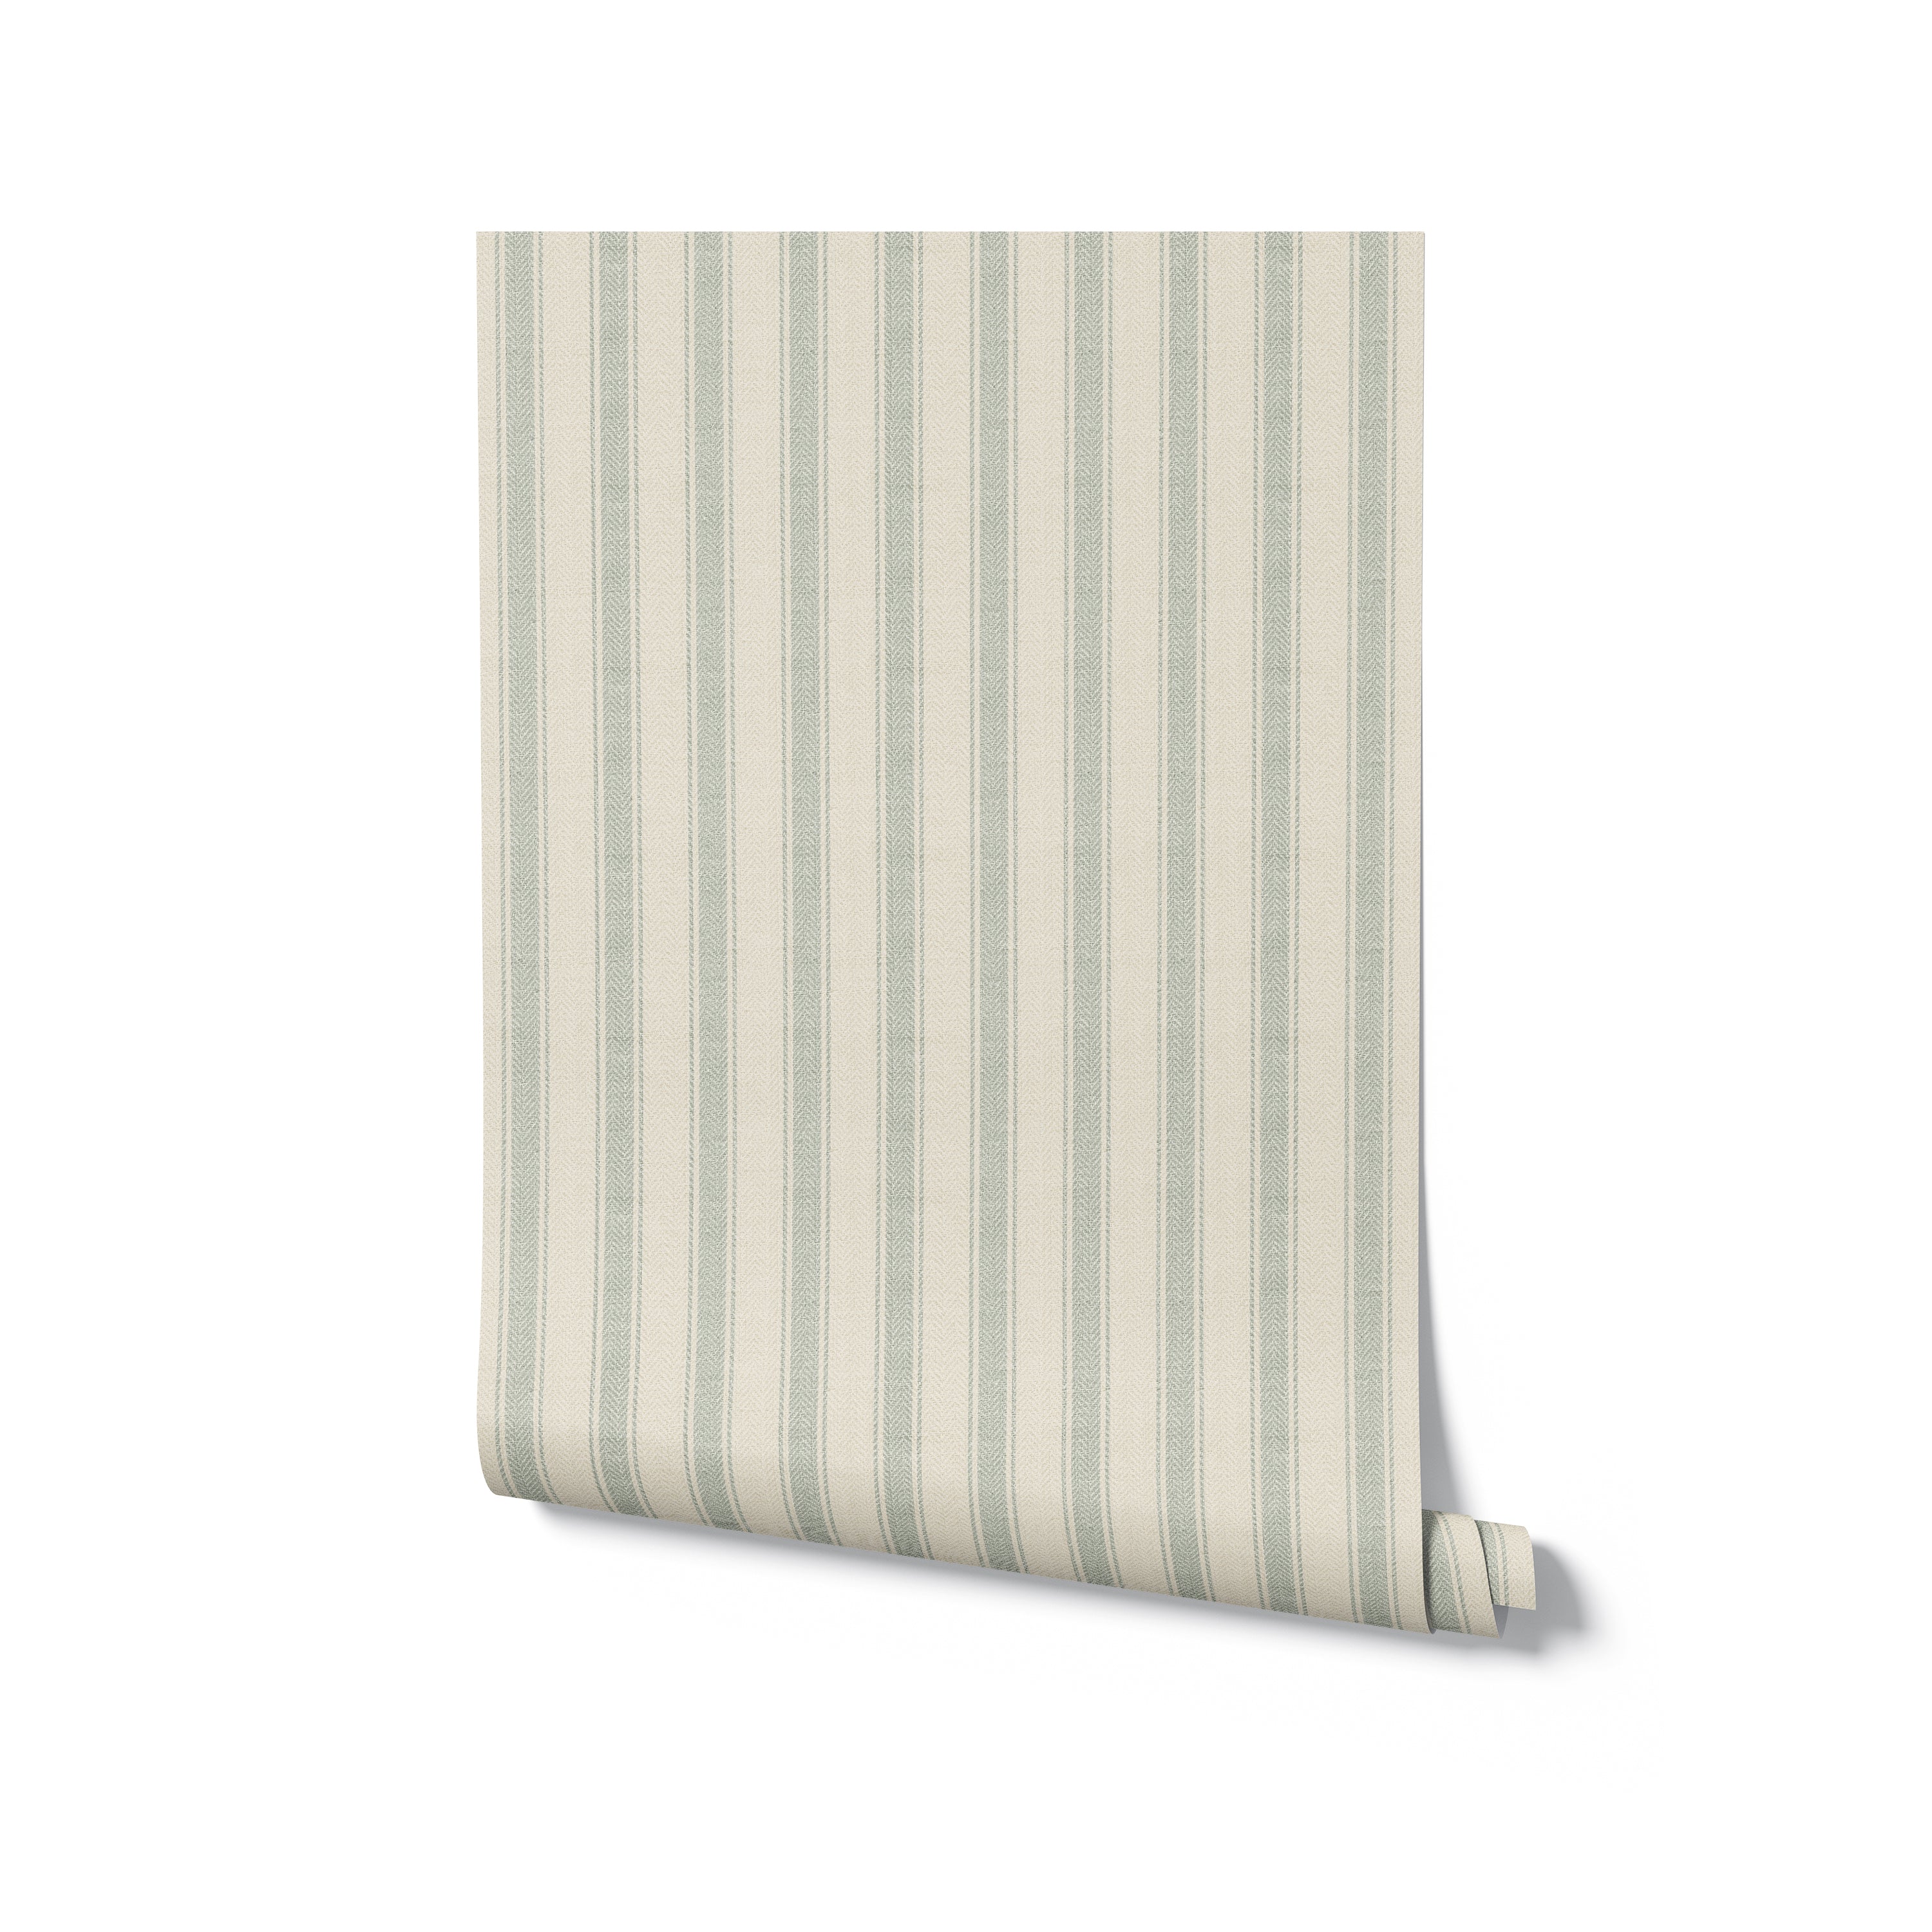 A rolled-up sample of the green striped wallpaper, known as Fabric 1C Wallpaper. The wallpaper features fine green stripes on a soft beige background, offering a classic design that can effortlessly elevate the aesthetics of any room with its timeless appeal.